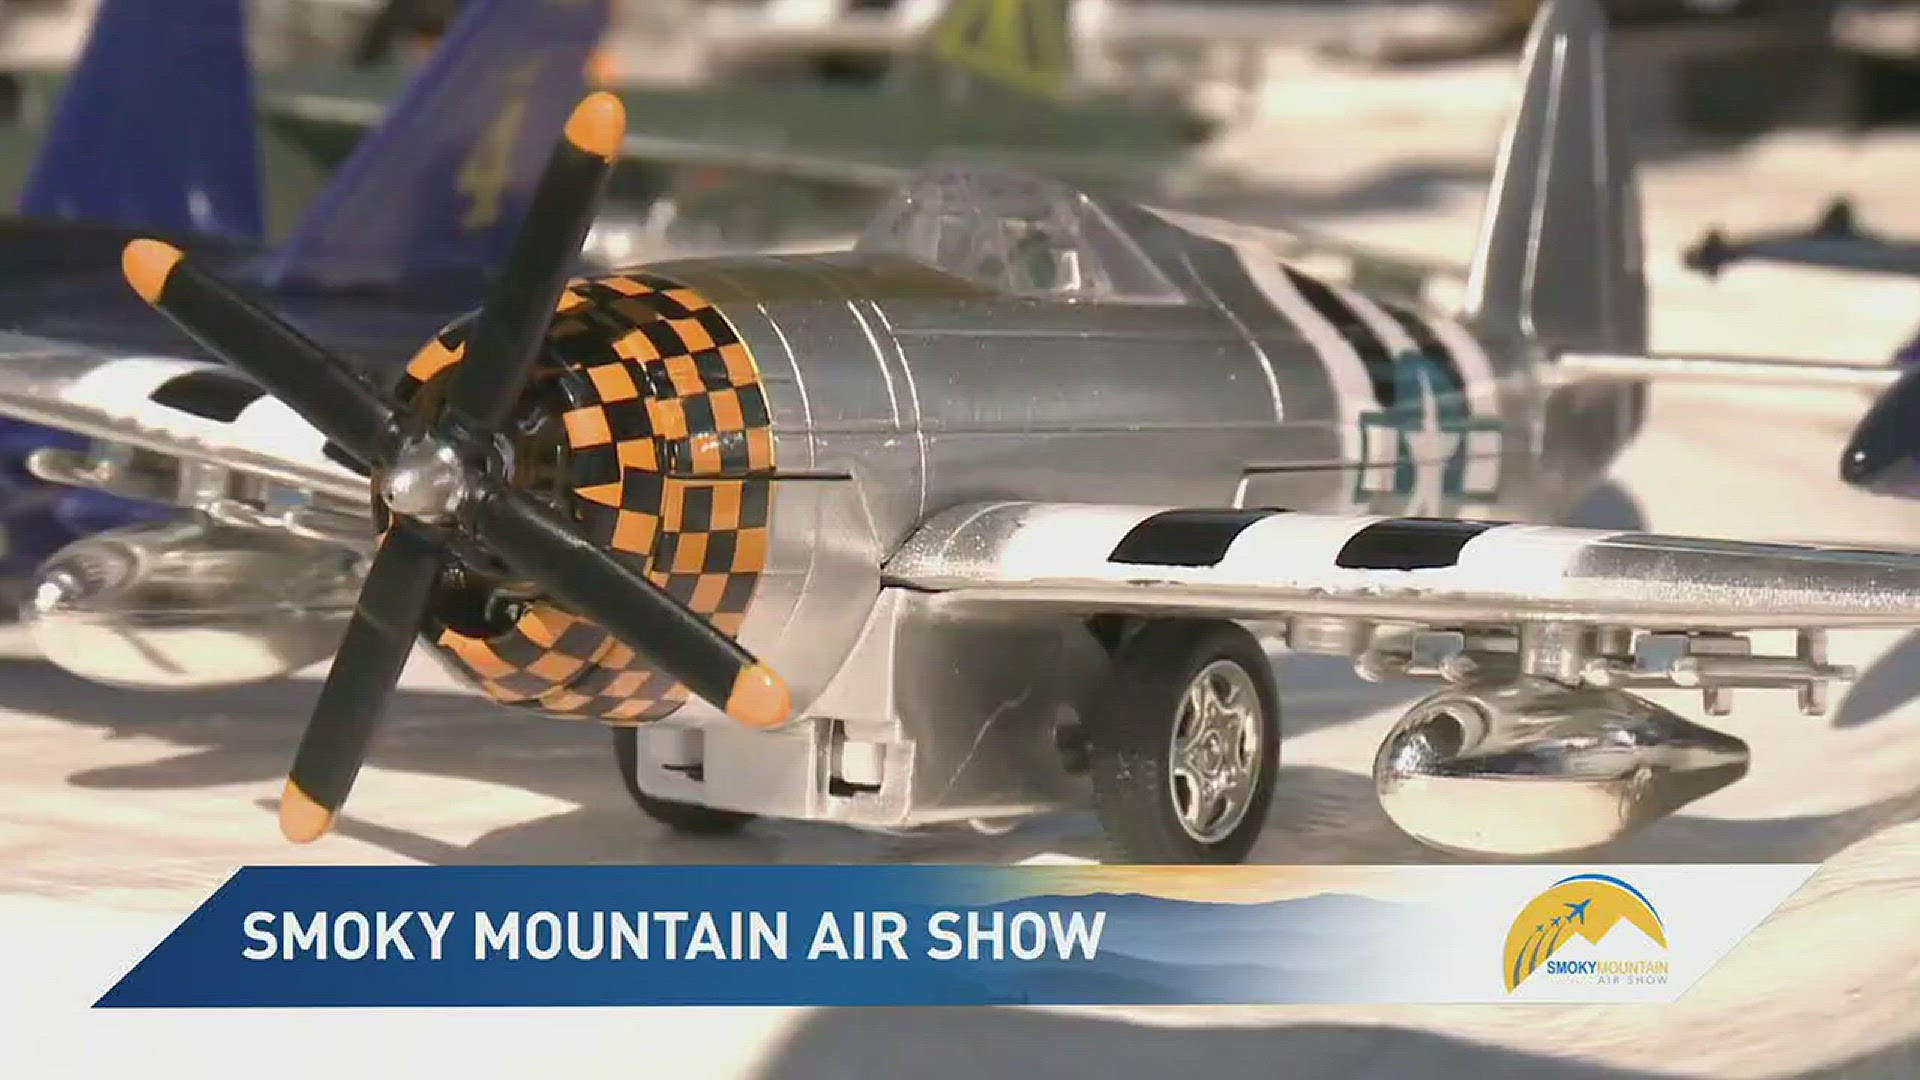 10News reporter Jim Matheny shows the history behind some of the toys sold at the Smoky Mountain Air Show.